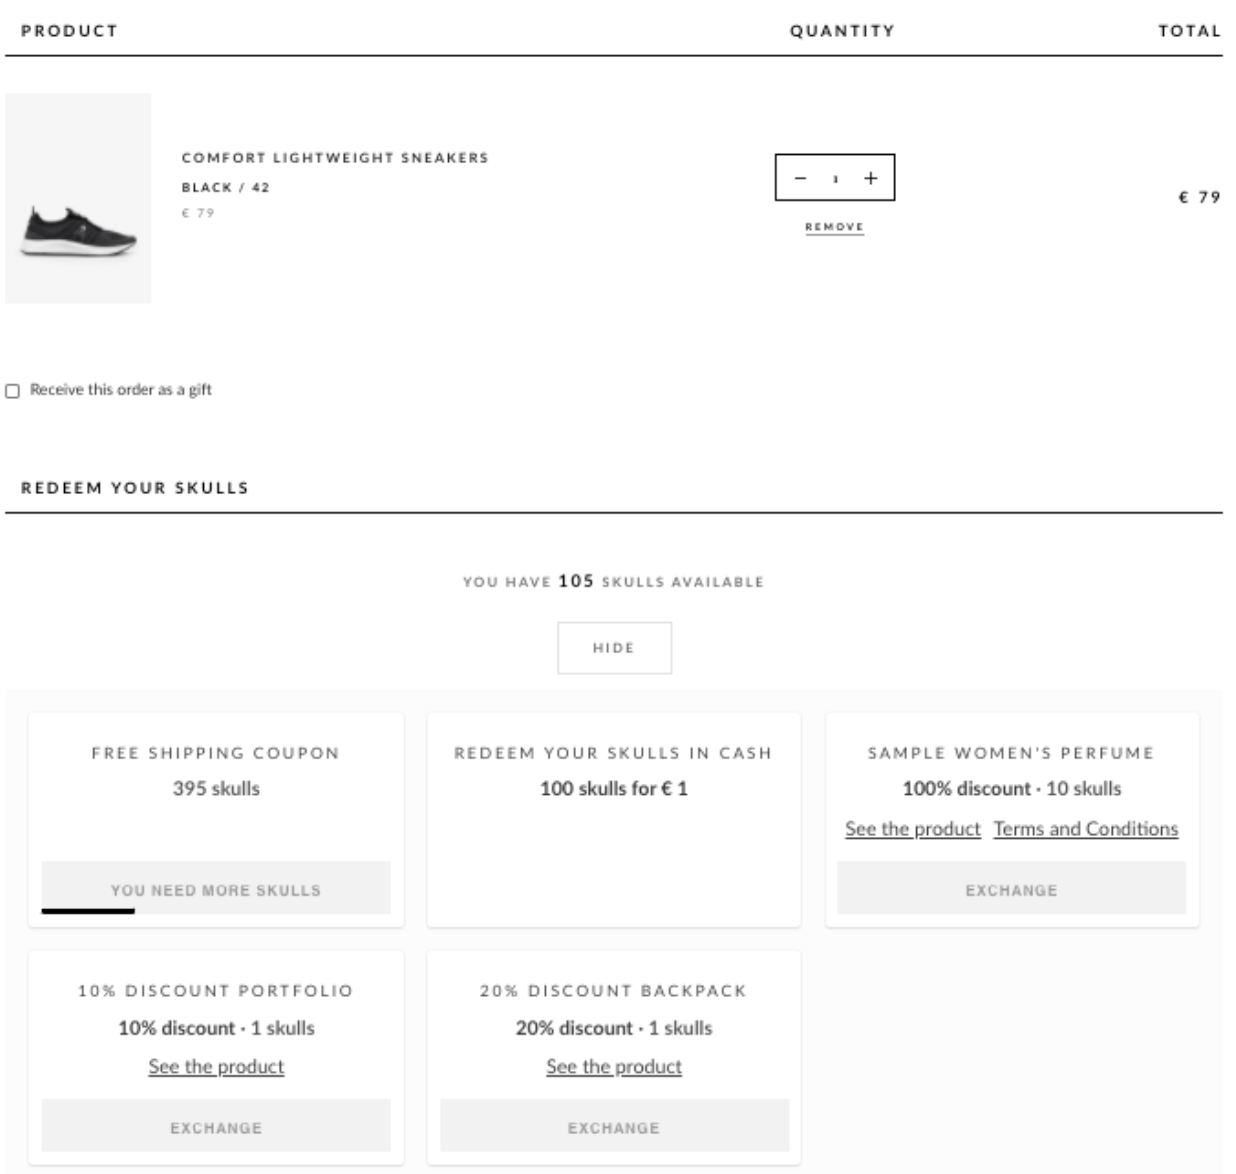 Rewards component in the cart